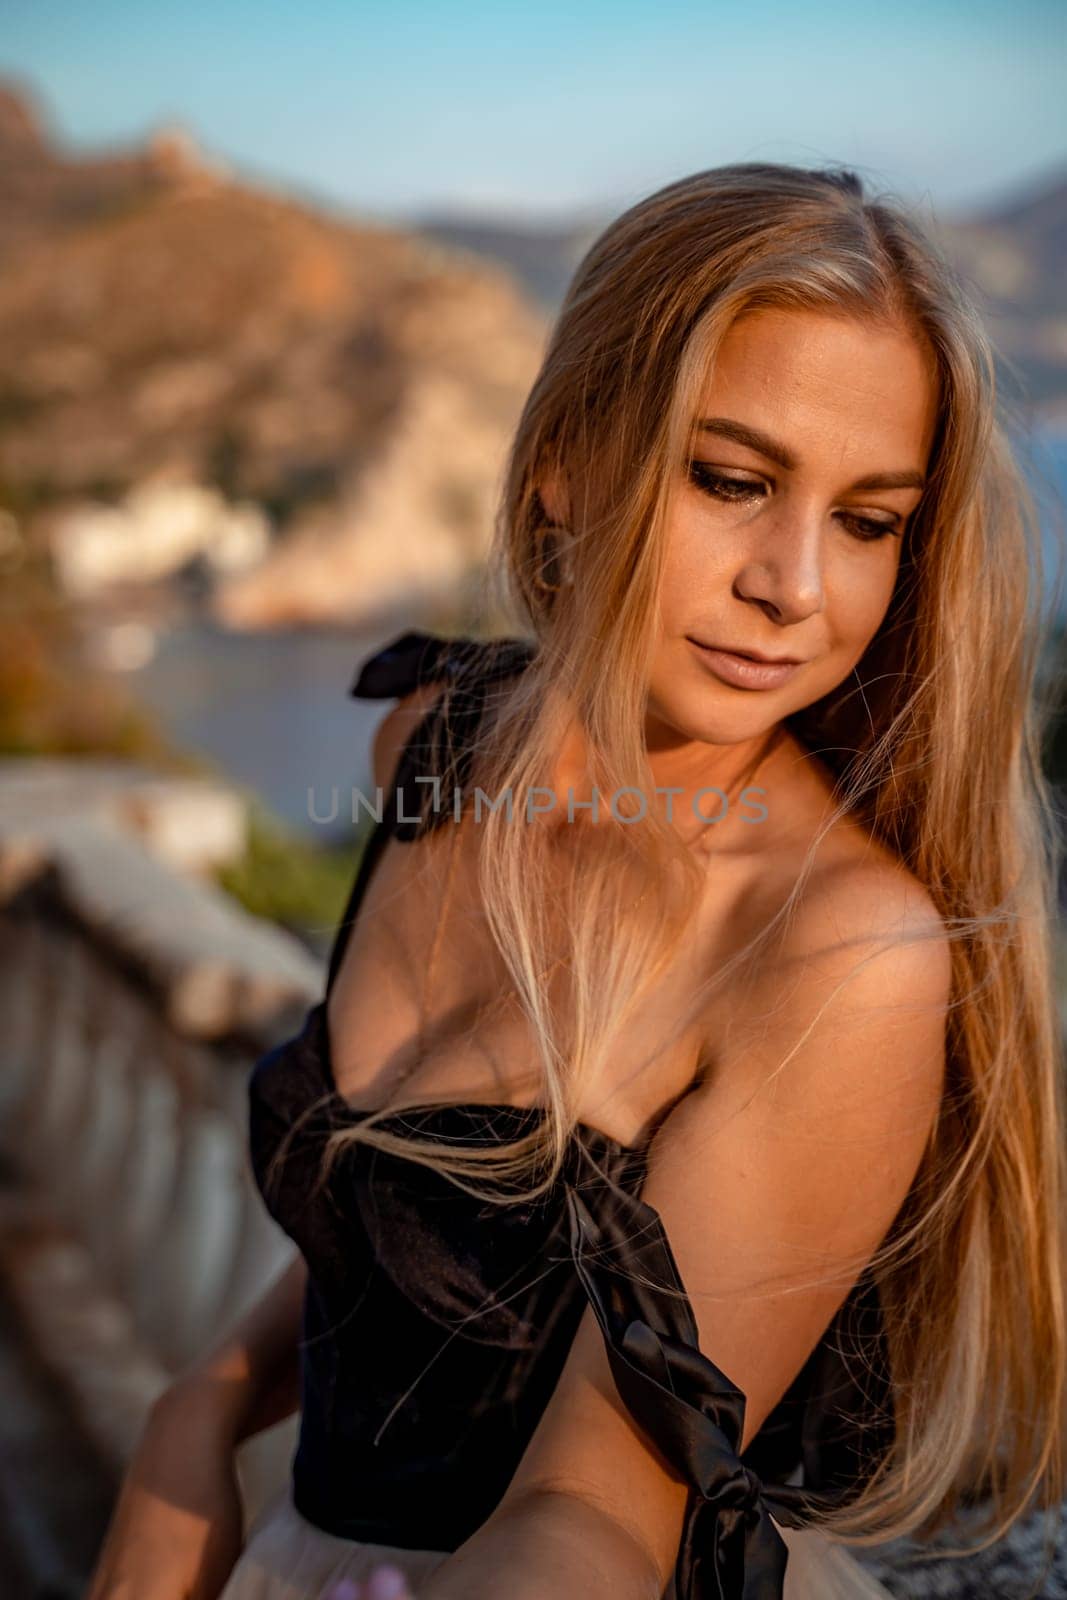 Blonde long hair, nature summer happy adult girl with long blond hair developing in the wind in nature. Dressed in a black top, white skirt